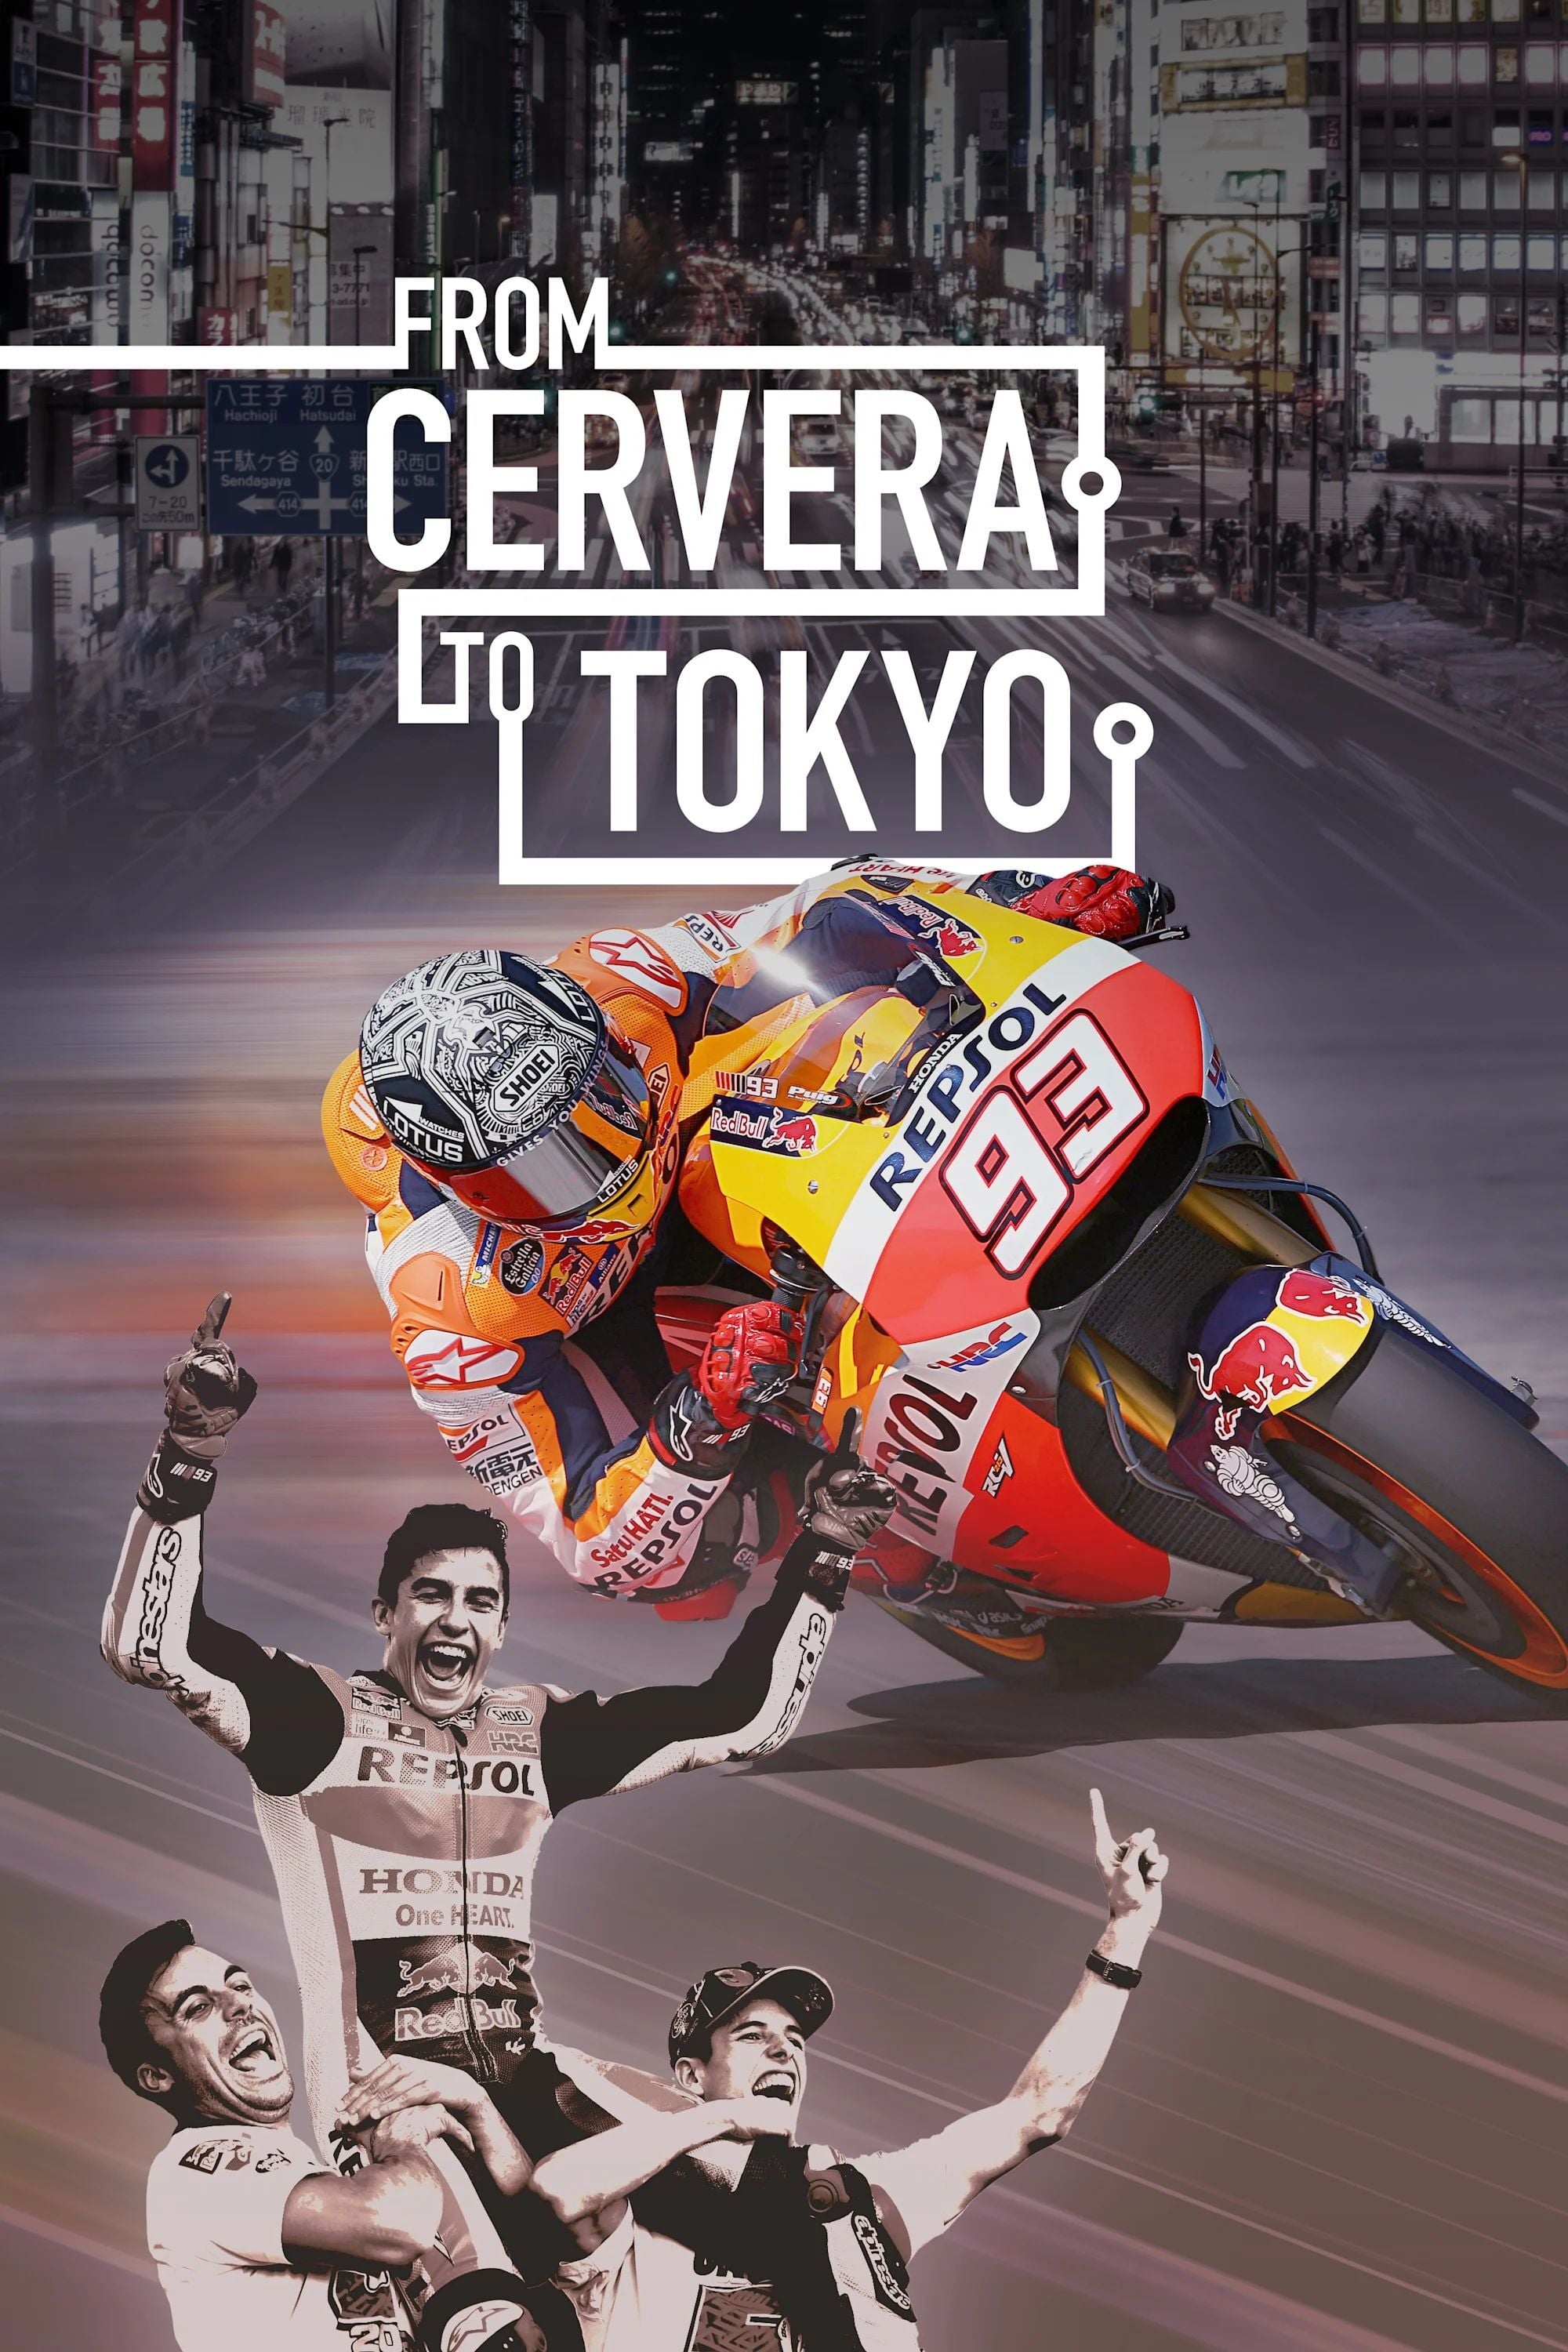 From Cervera to Tokyo